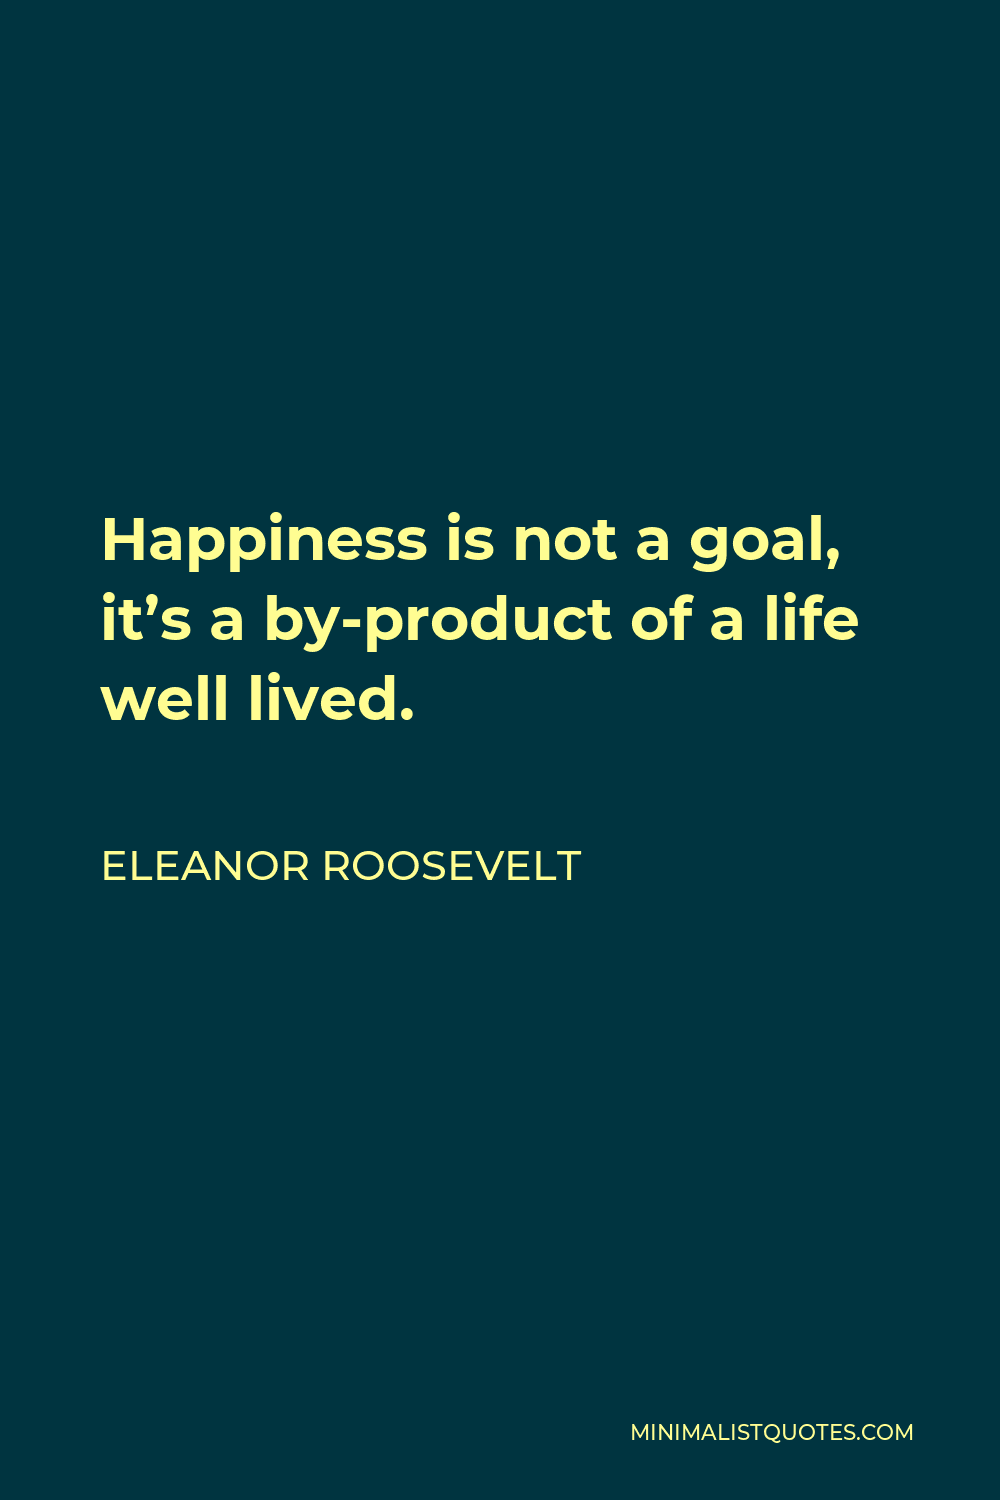 Eleanor Roosevelt Quote: Happiness is not a goal, it's a by-product of ...